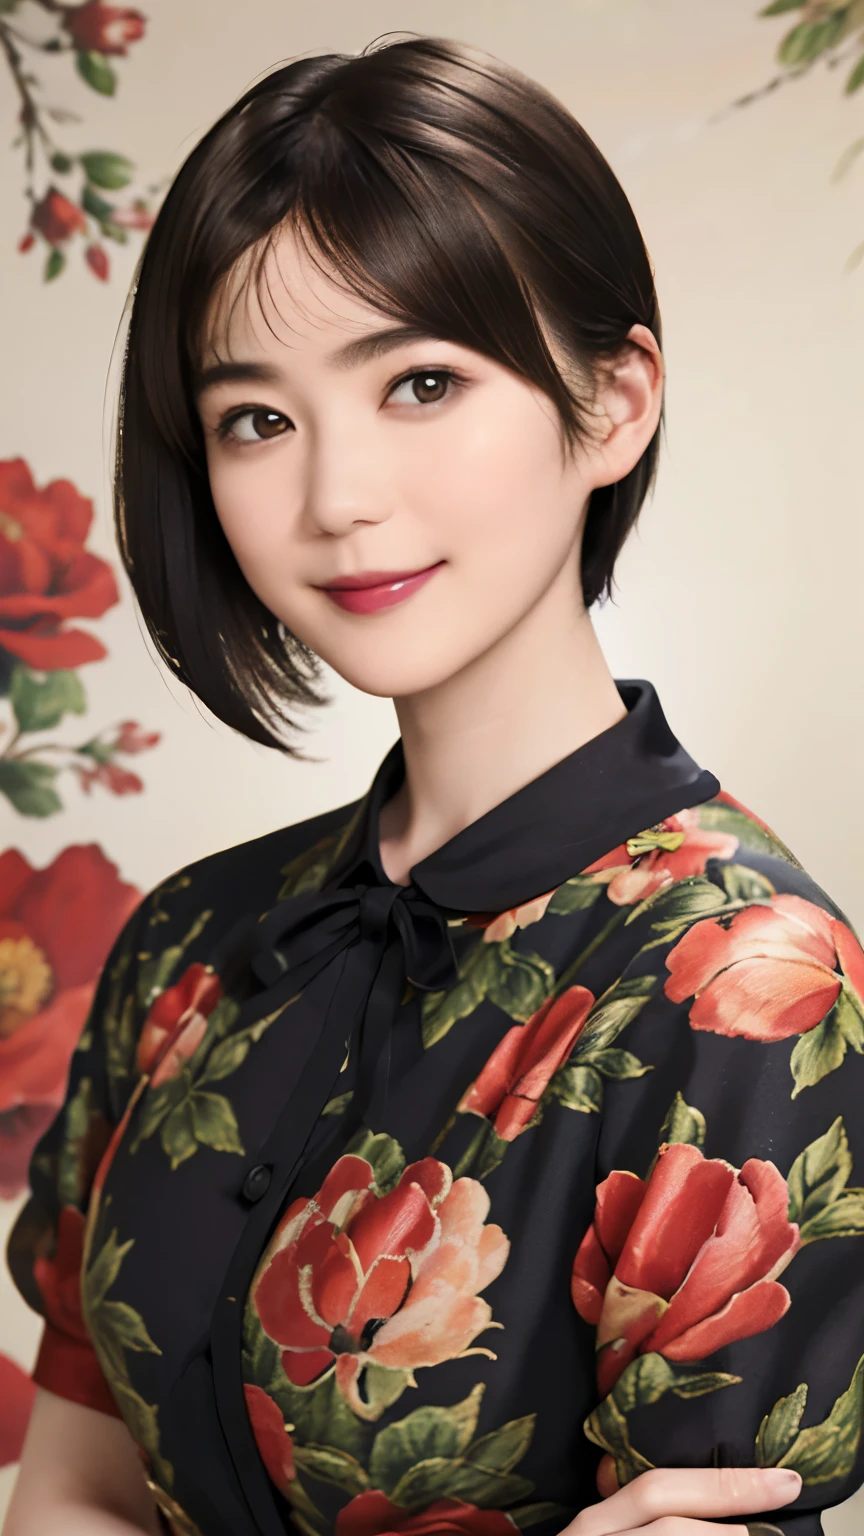 151
(20 year old woman,Floral clothing), (Super realistic), (high resolution), ((beautiful hairstyle 46)), ((short hair:1.46)), (gentle smile), (brest:1.1), (lipstick)
